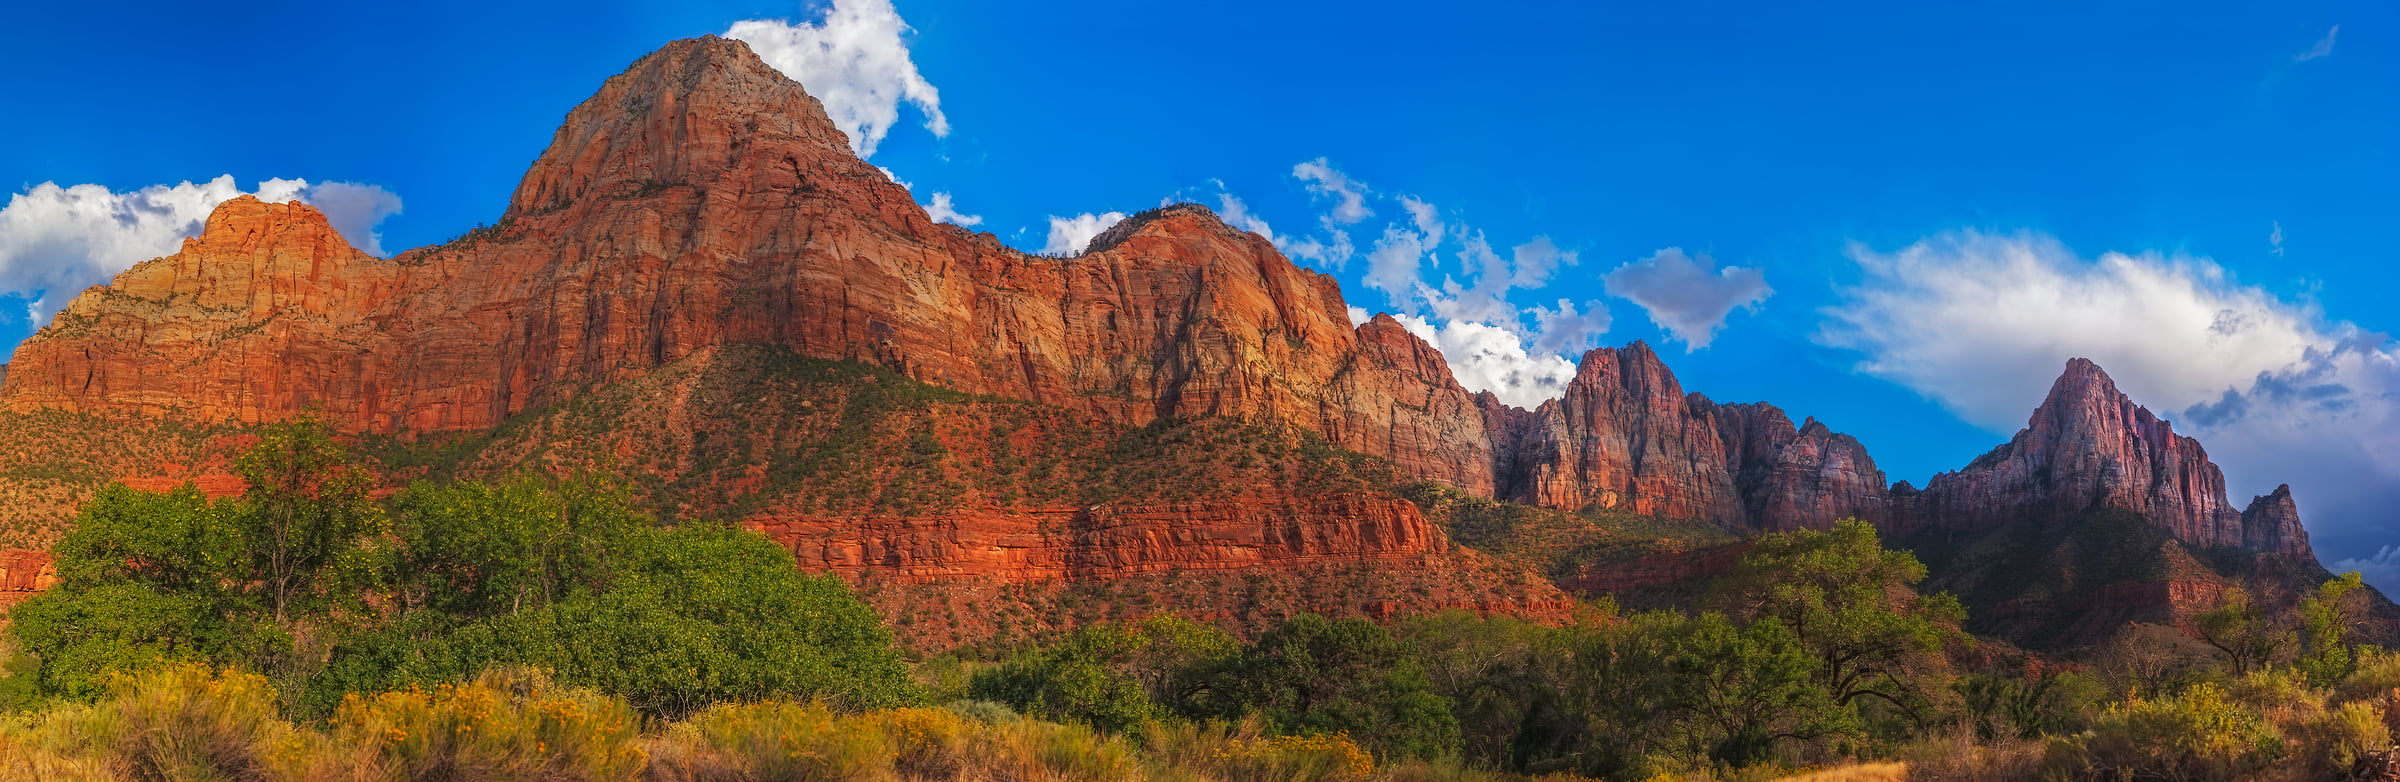 4,075 megapixels! A very high resolution, large-format VAST photo print of The Watchman mountain; landscape photograph created by John Freeman at Zion National Park, Utah